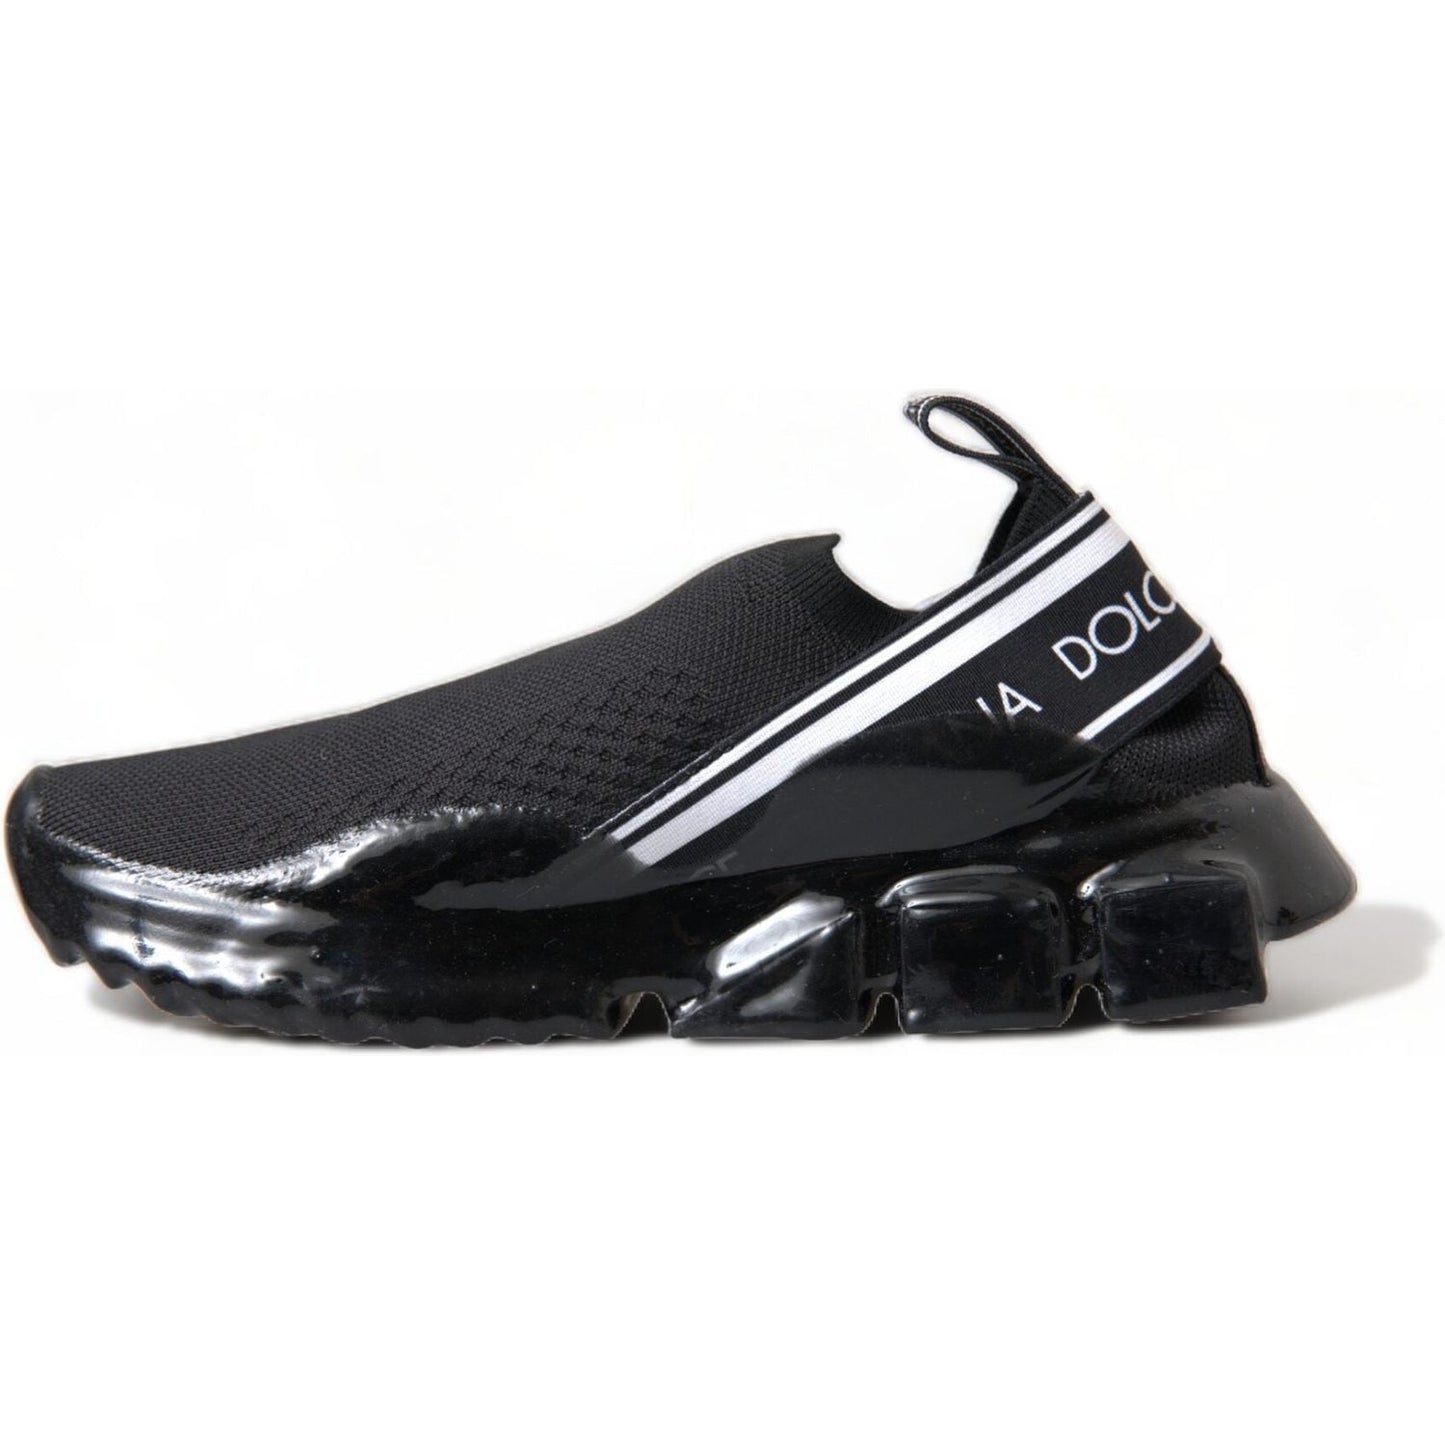 Dolce & Gabbana Chic Monochrome Sorrento Sneakers black-sorrento-slip-on-low-top-sneakers-shoes